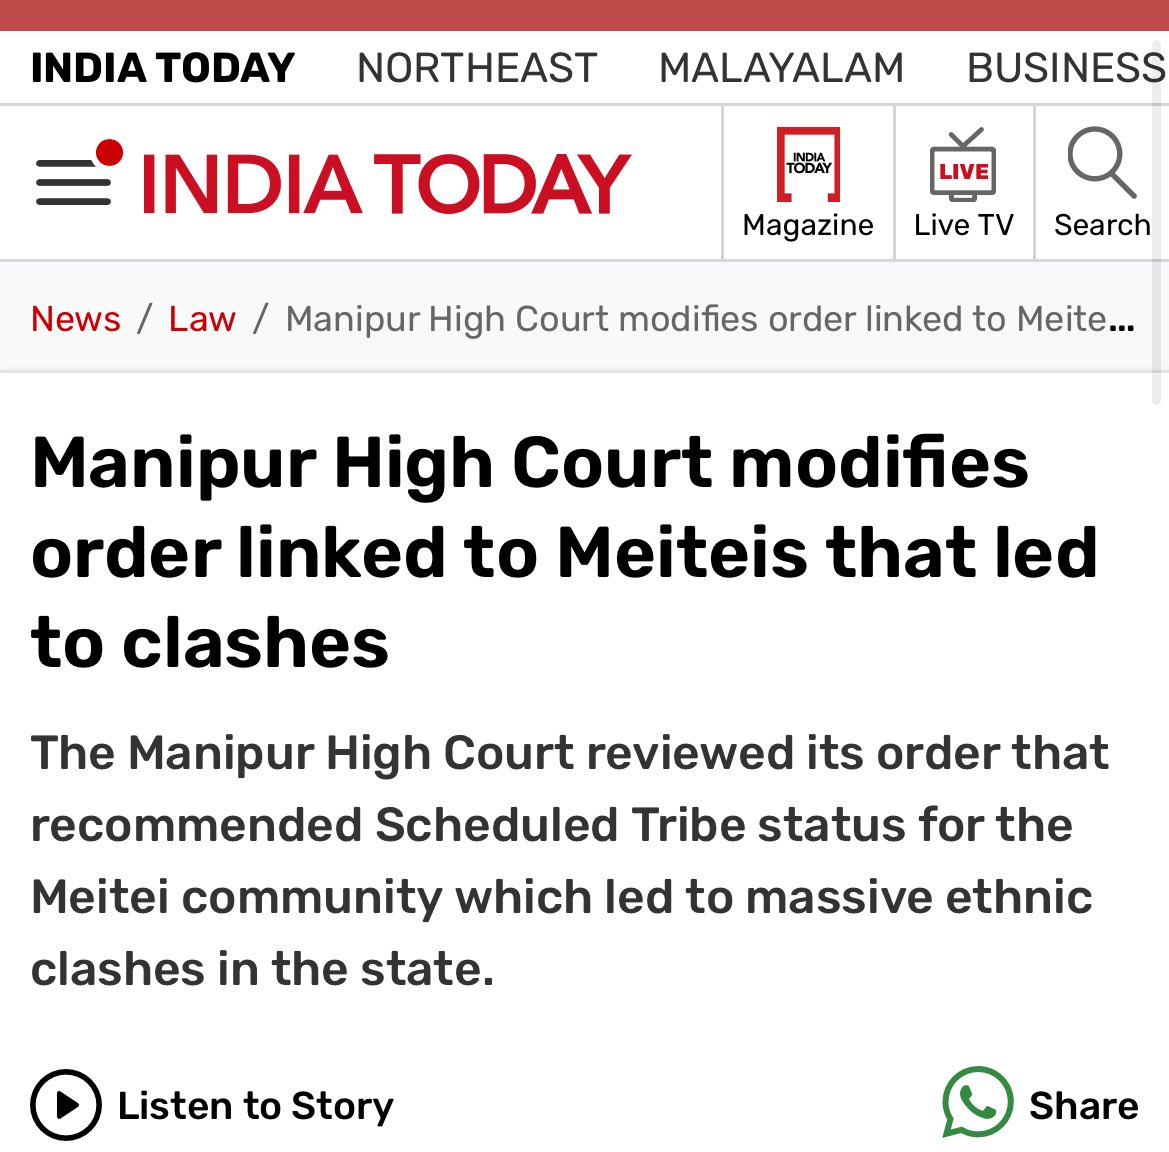 @dhruv_rathee Dhruv Rathee,
You should also tell the people why this violence broke out.

Why an uneducated miyanlord without assessing the on-ground situation gave a verdict which flamed this violence?

#ManipurViolence #Manipurconflict #Meitei #kuki